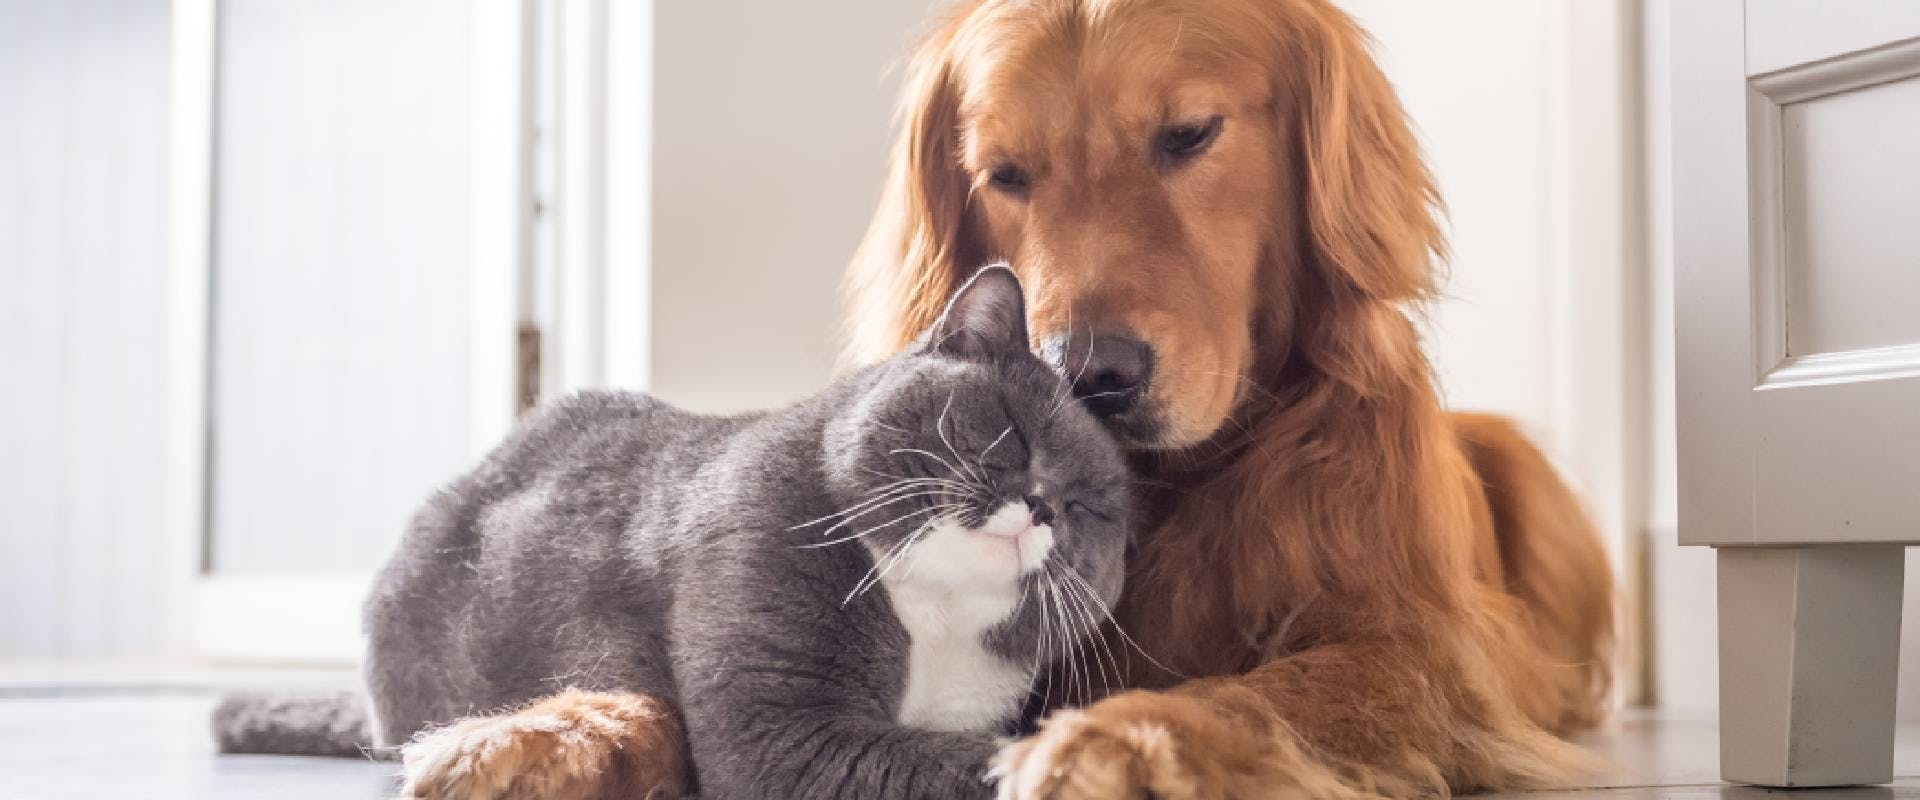 Cat and Golden Retriever sitting together